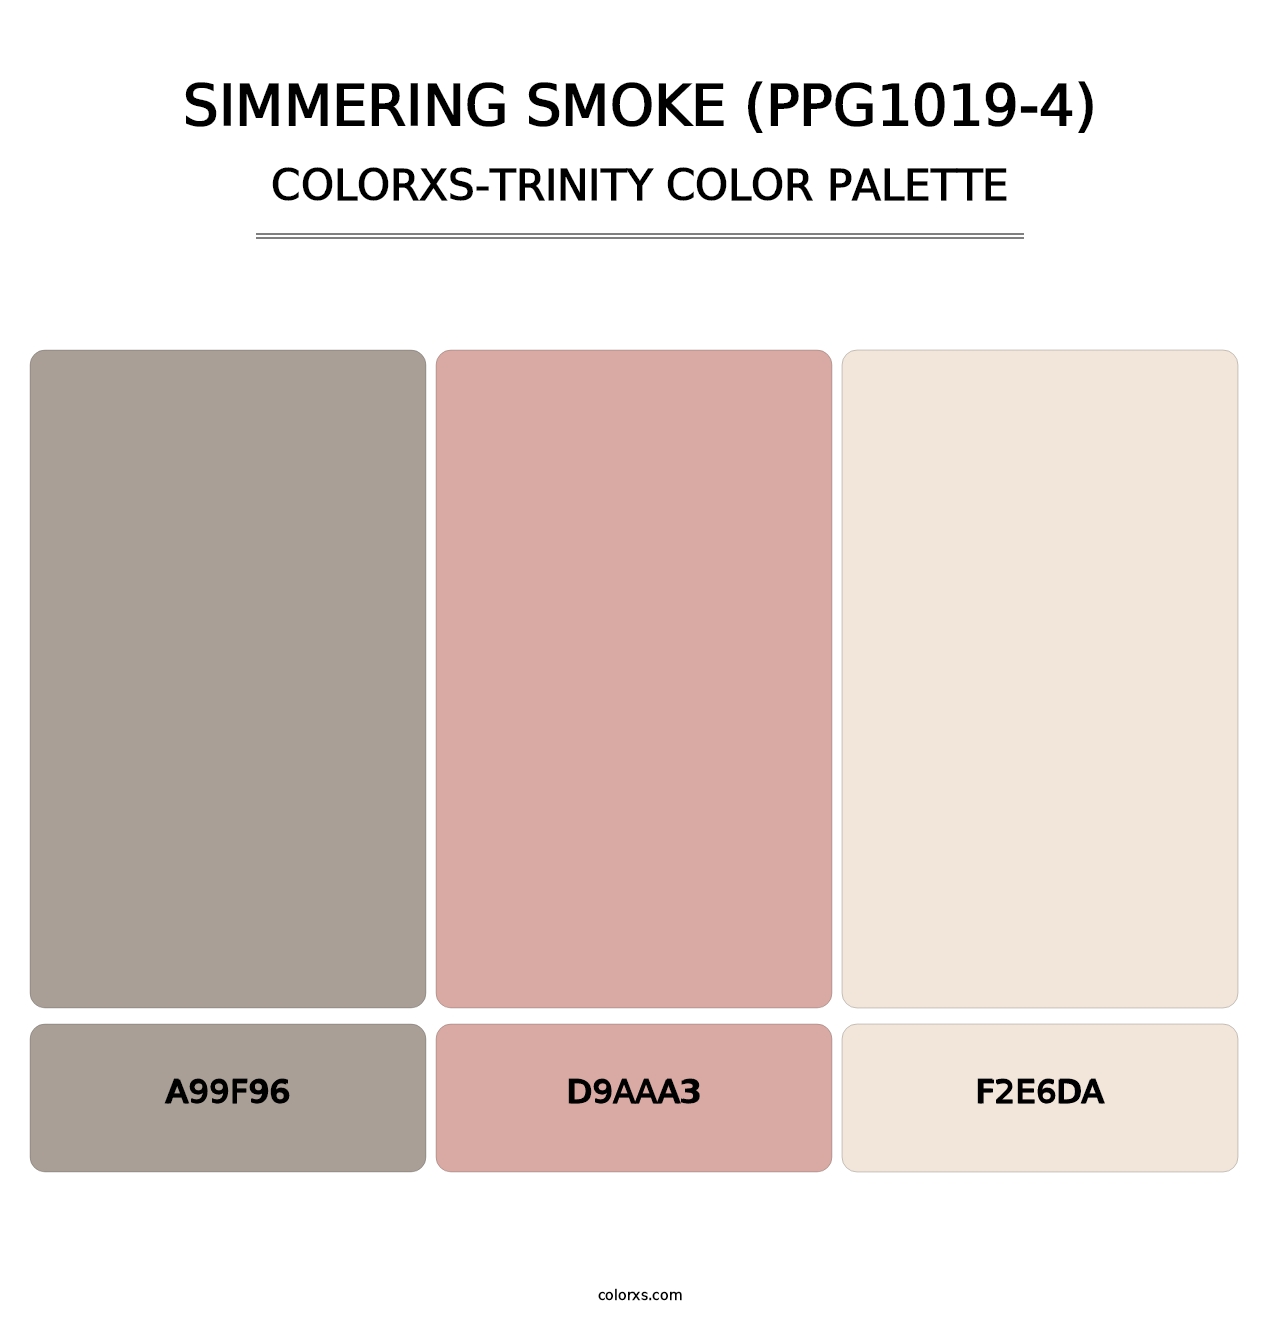 Simmering Smoke (PPG1019-4) - Colorxs Trinity Palette